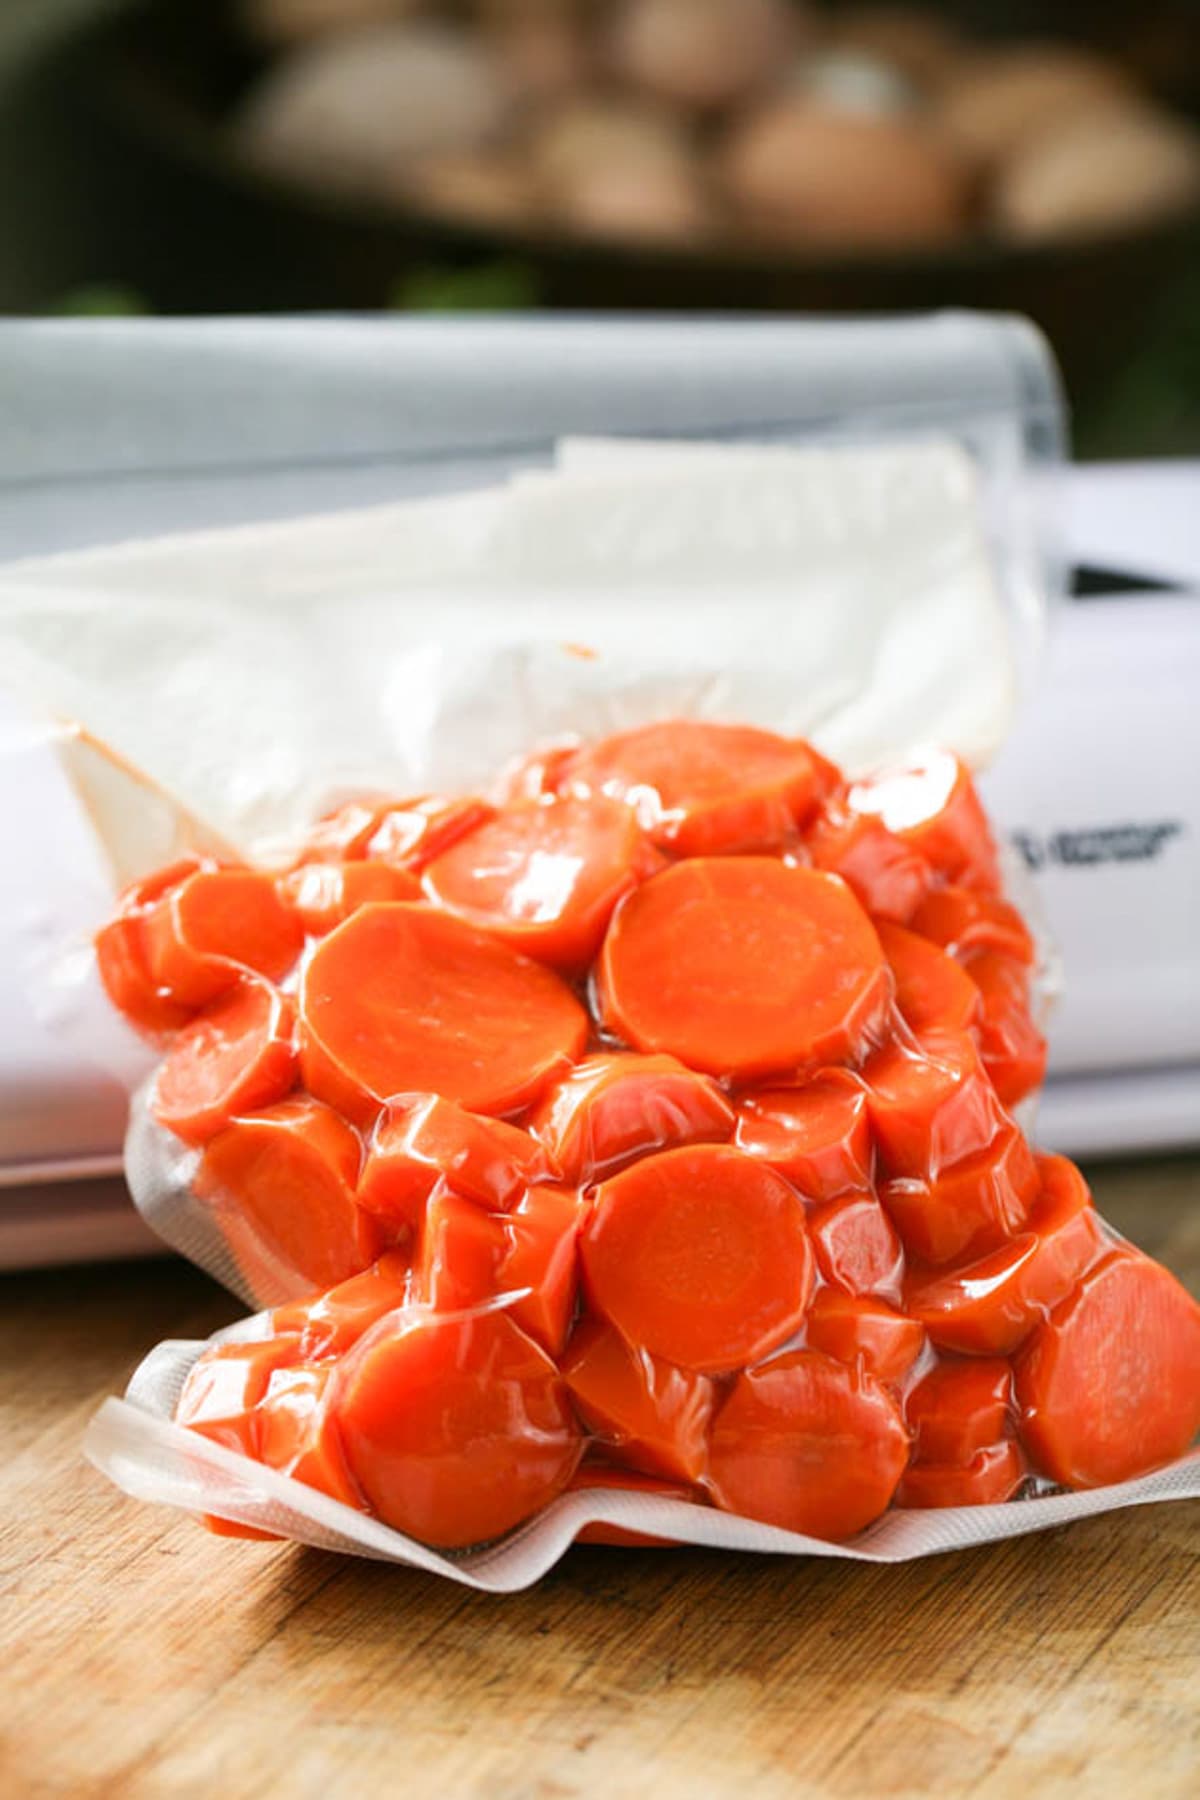 vacuumed bag of carrots ready for the freezer